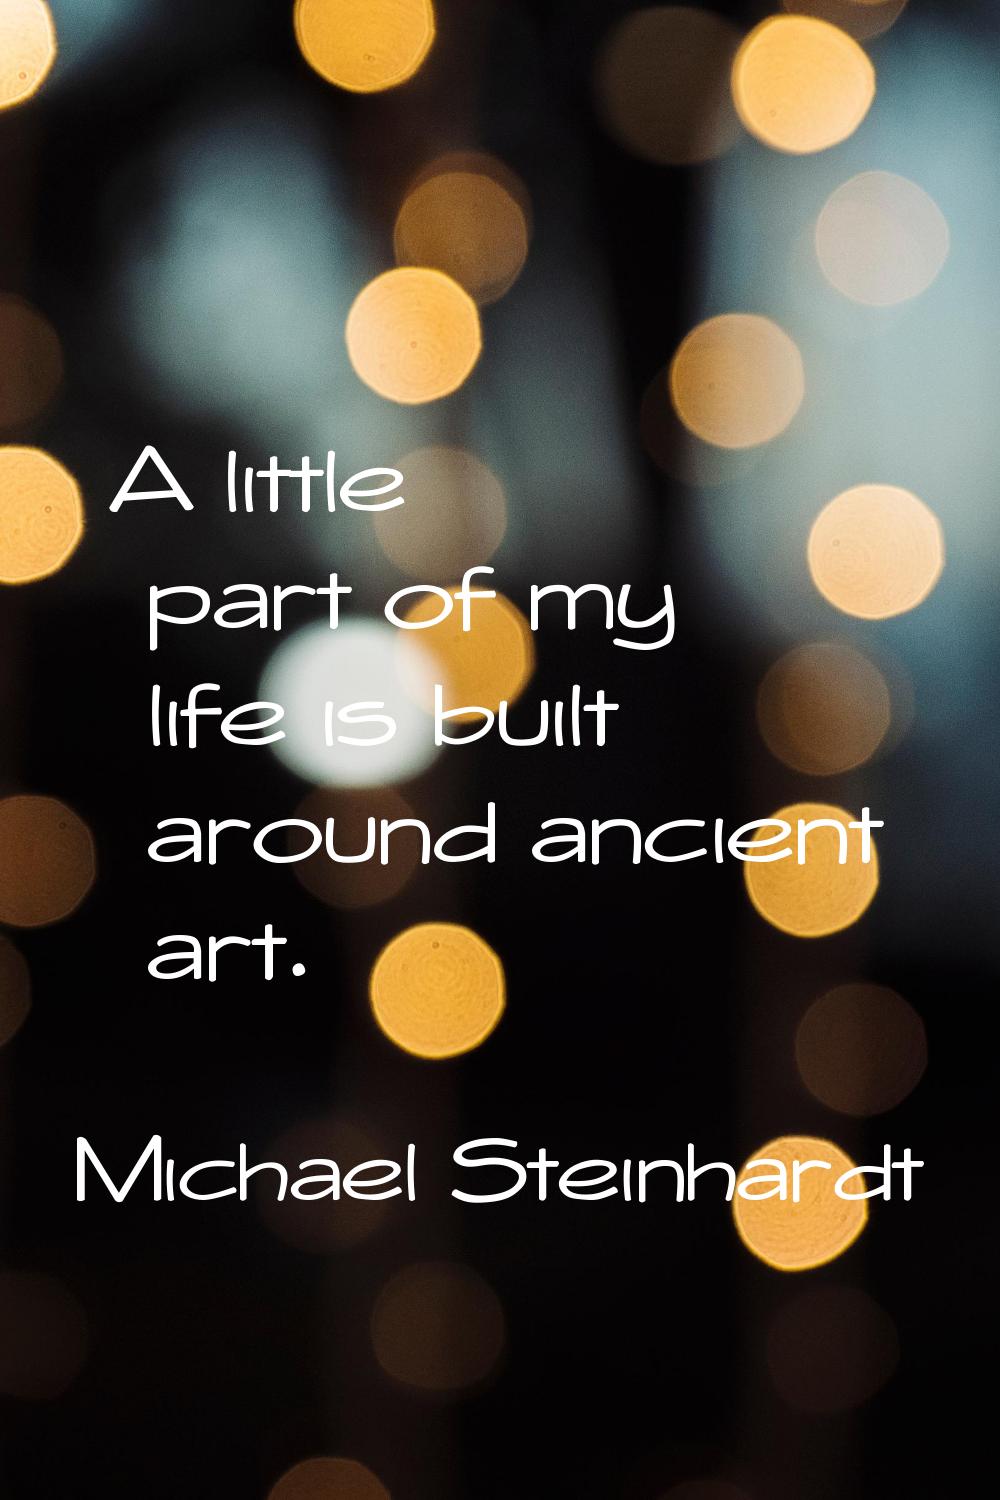 A little part of my life is built around ancient art.